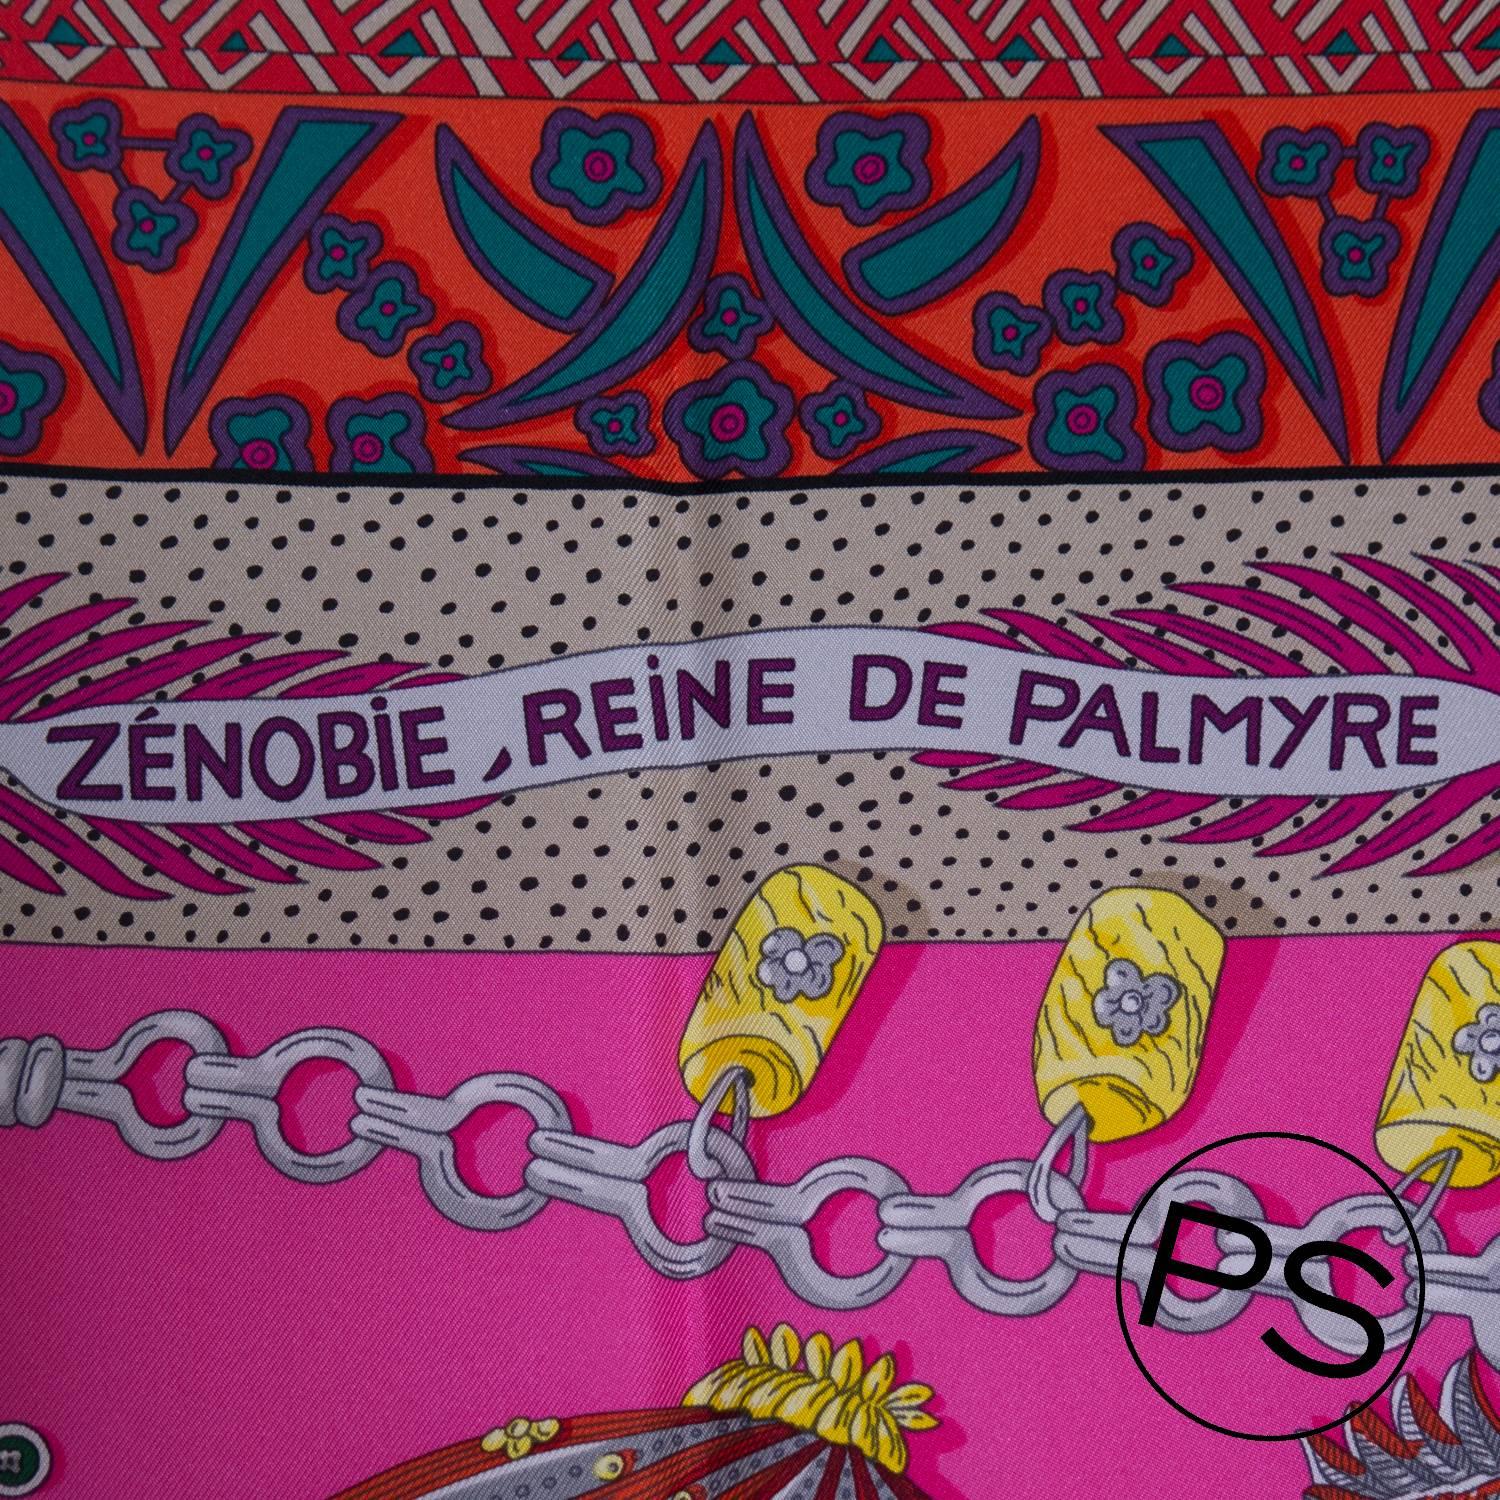 Hermes Carre Twill Zenobie Reine de Palmyre Pink, Orange 2015.

Pre-owned and never used.

Bought it in Hermes store in 2015.

Model; Zenobie, Reine de Palmyre

Composition; 100% Silk.

Size; 90cm x 90cm.

Color; 